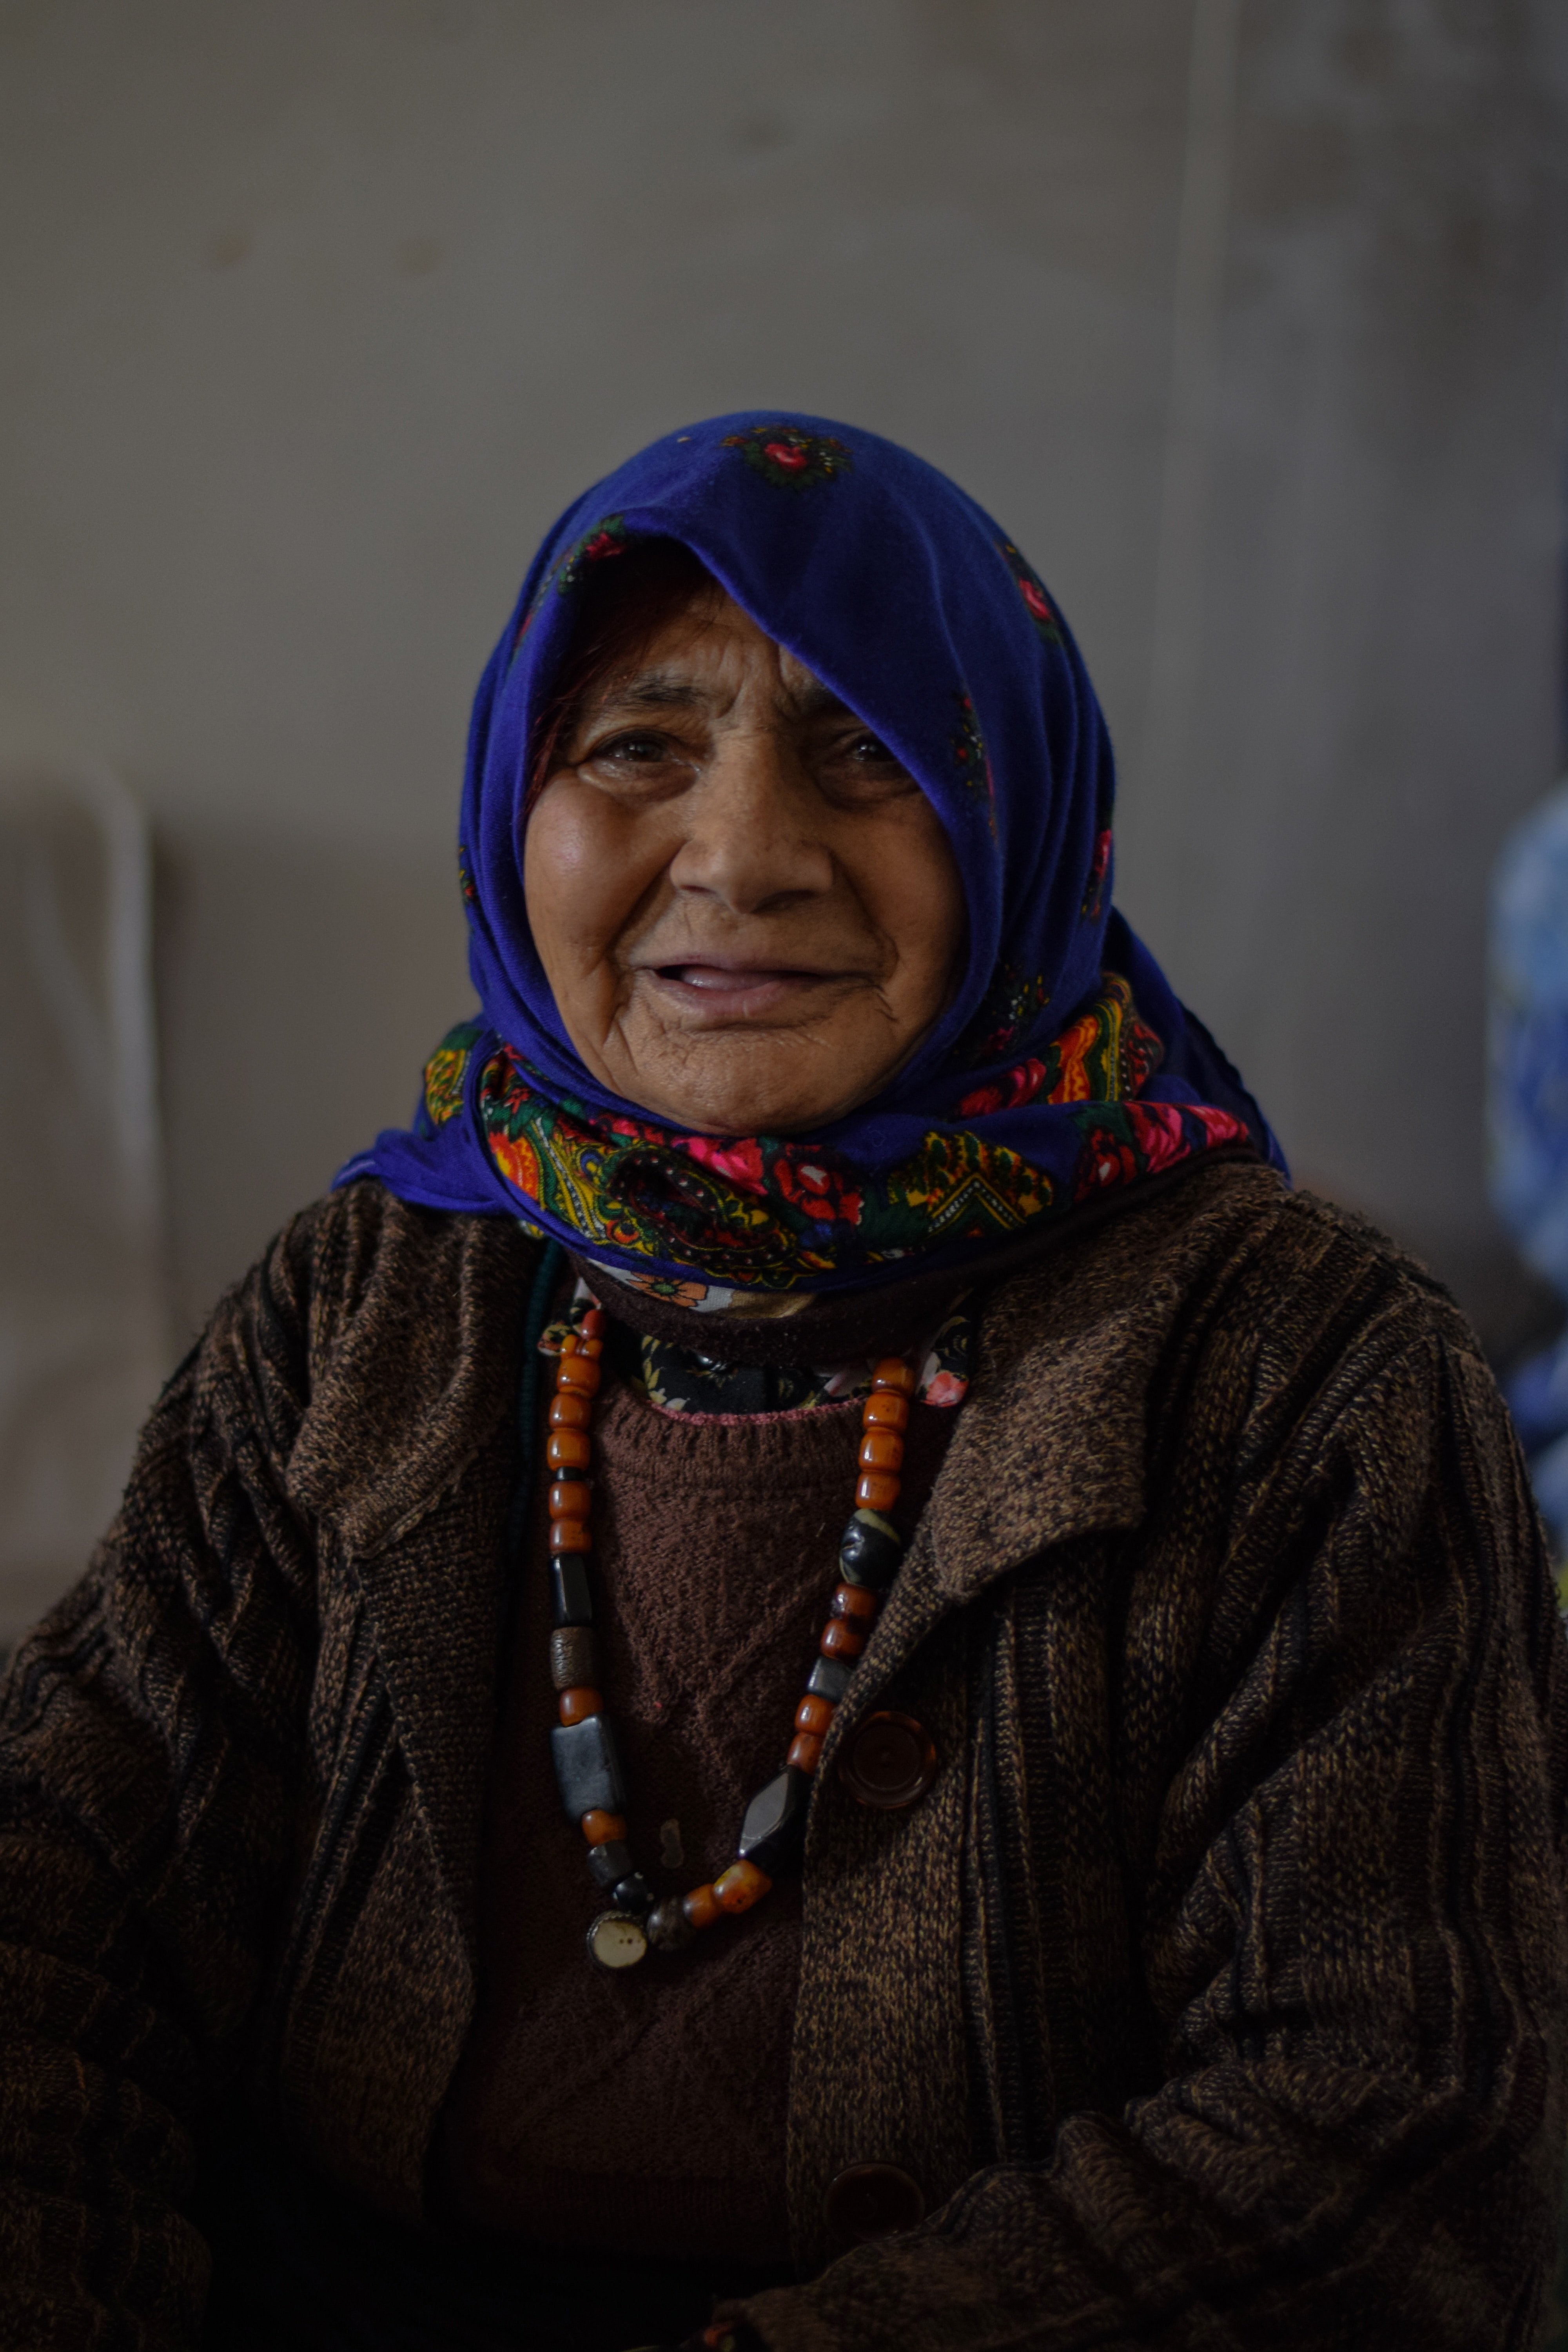 An old woman wearing a blue scarf. | Source: Unsplash